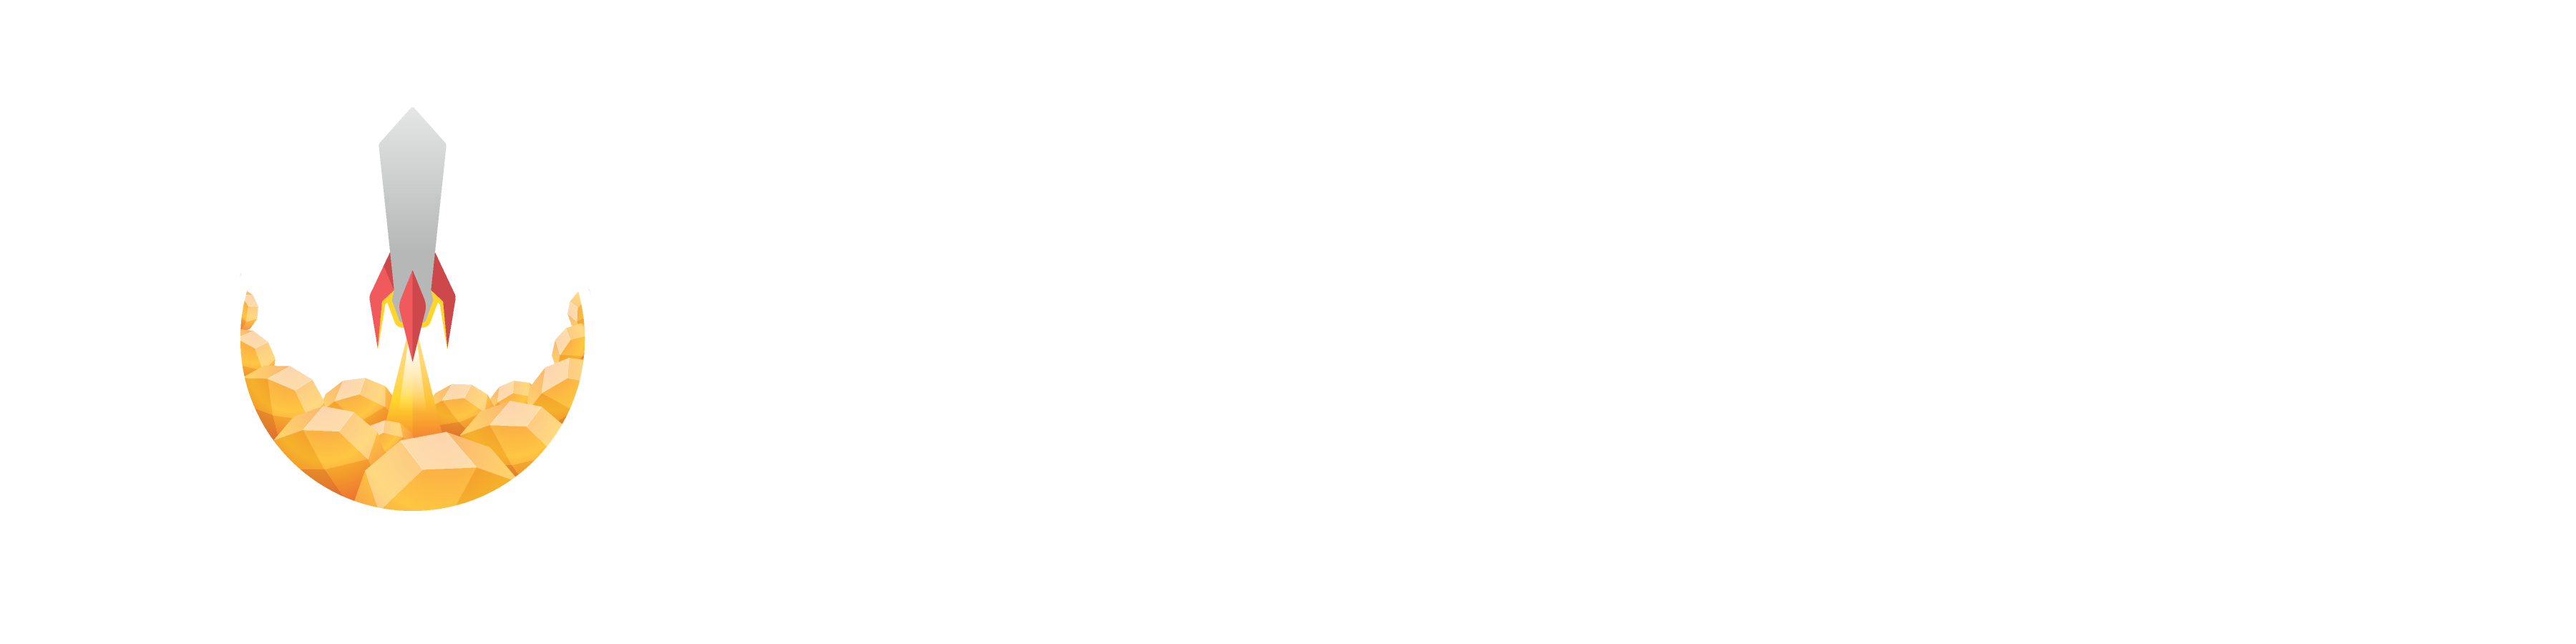 Overlays and Alerts for Twitch, YouTube and Facebook Live Streaming |  StreamElements